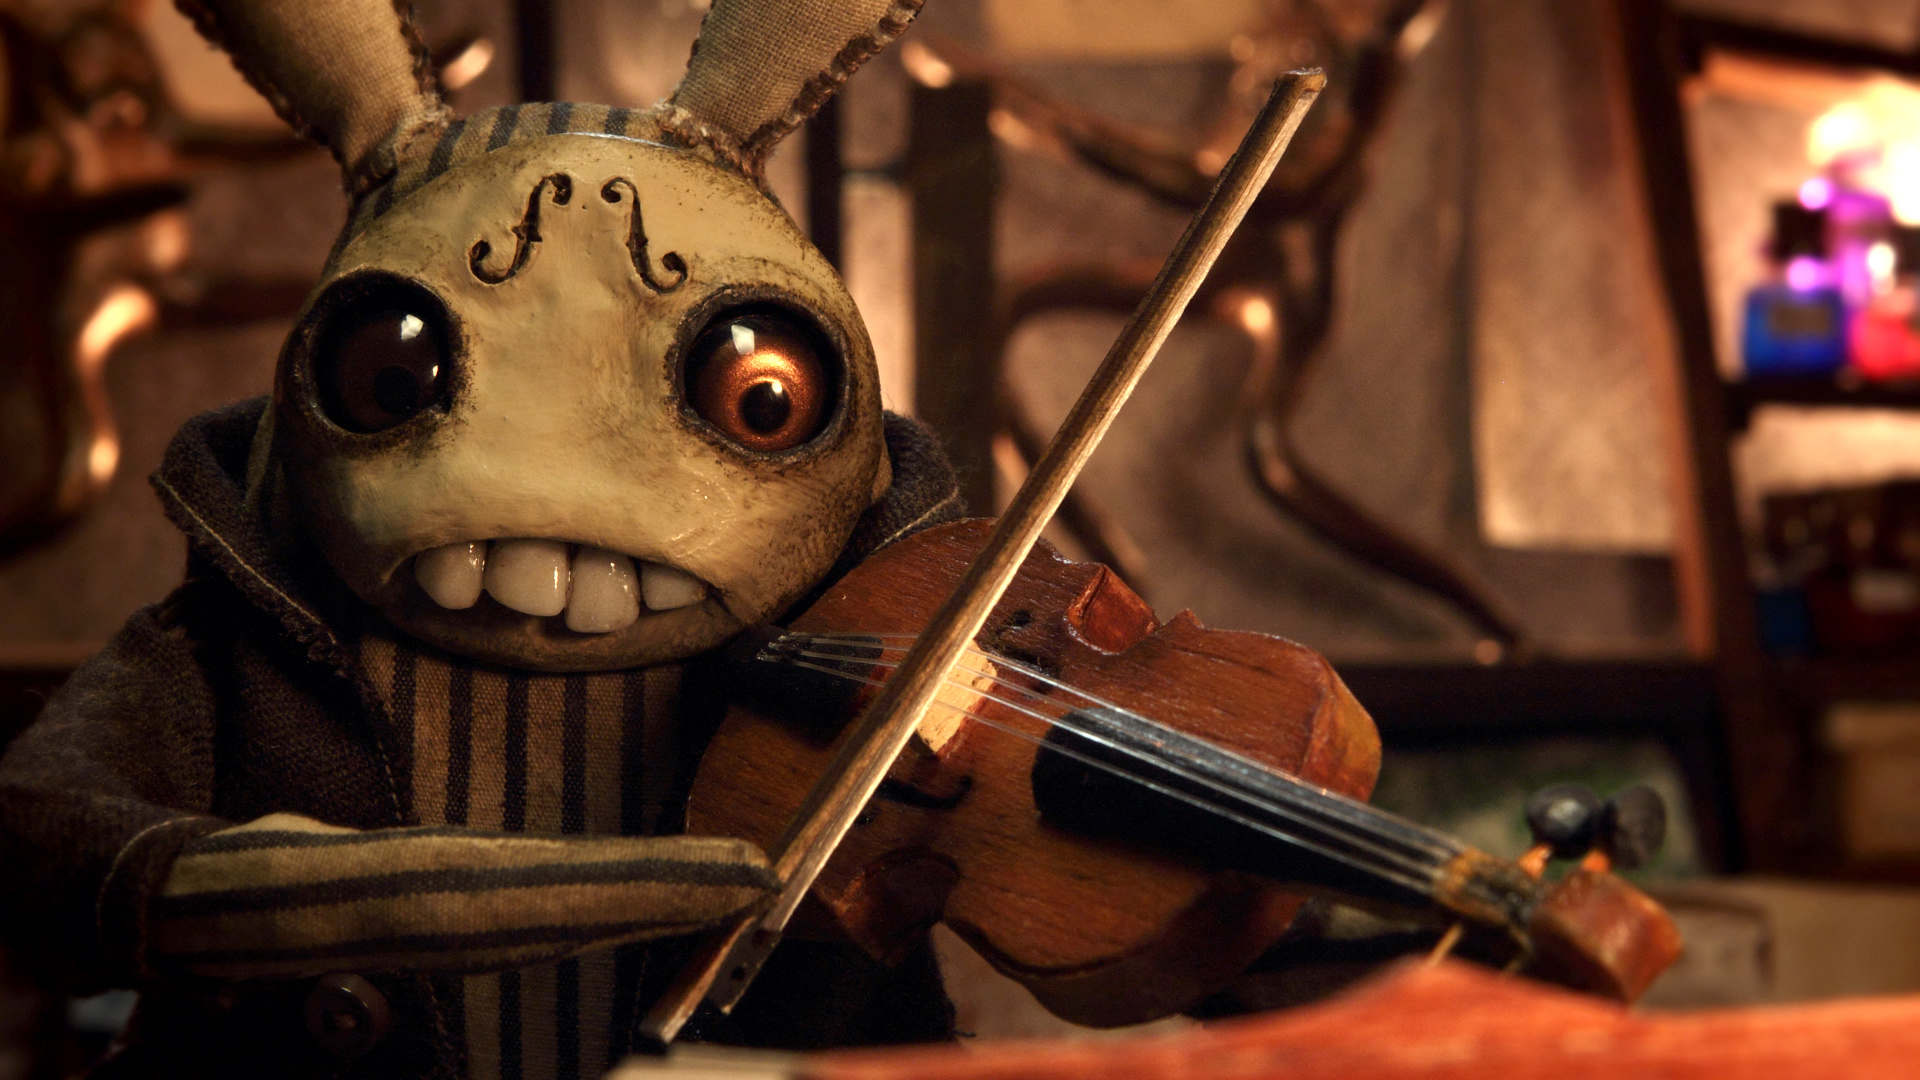 Zero and The Maker: Award-Winning Stop-Motion Films By Christopher and